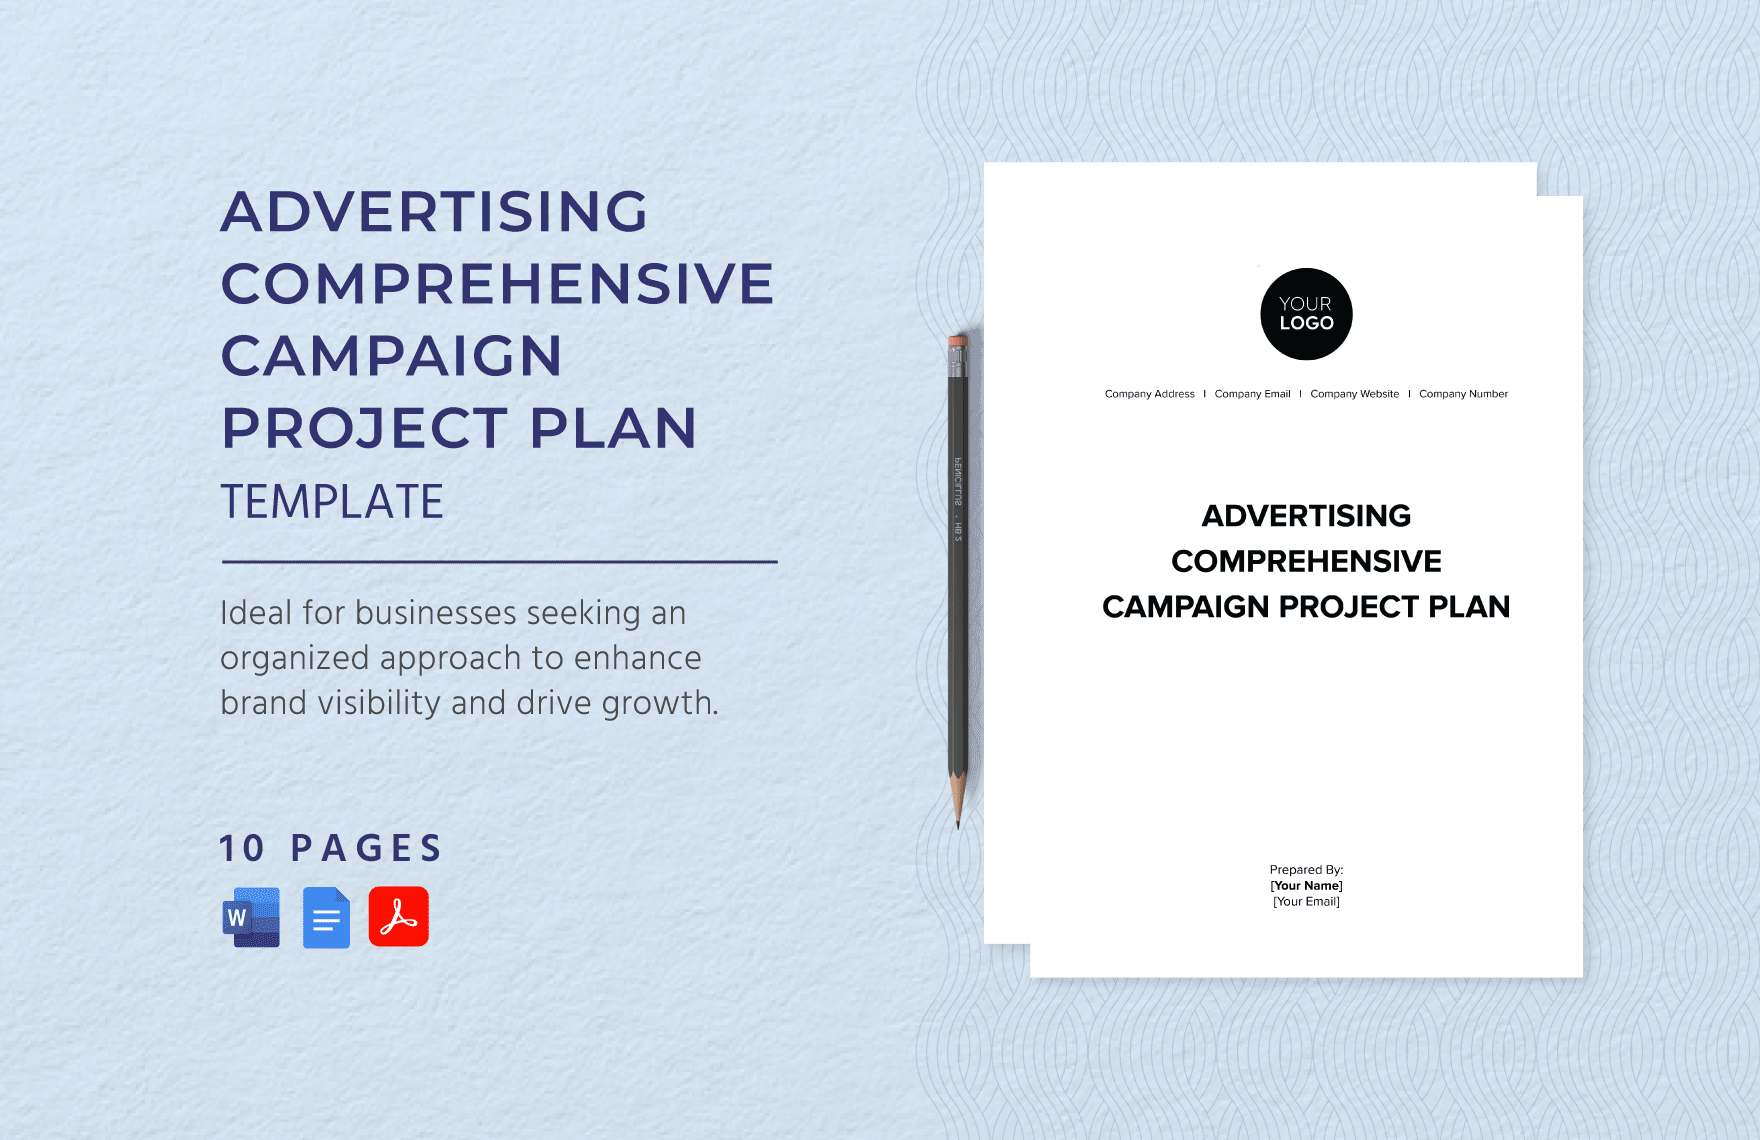 Advertising Comprehensive Campaign Project Plan Template